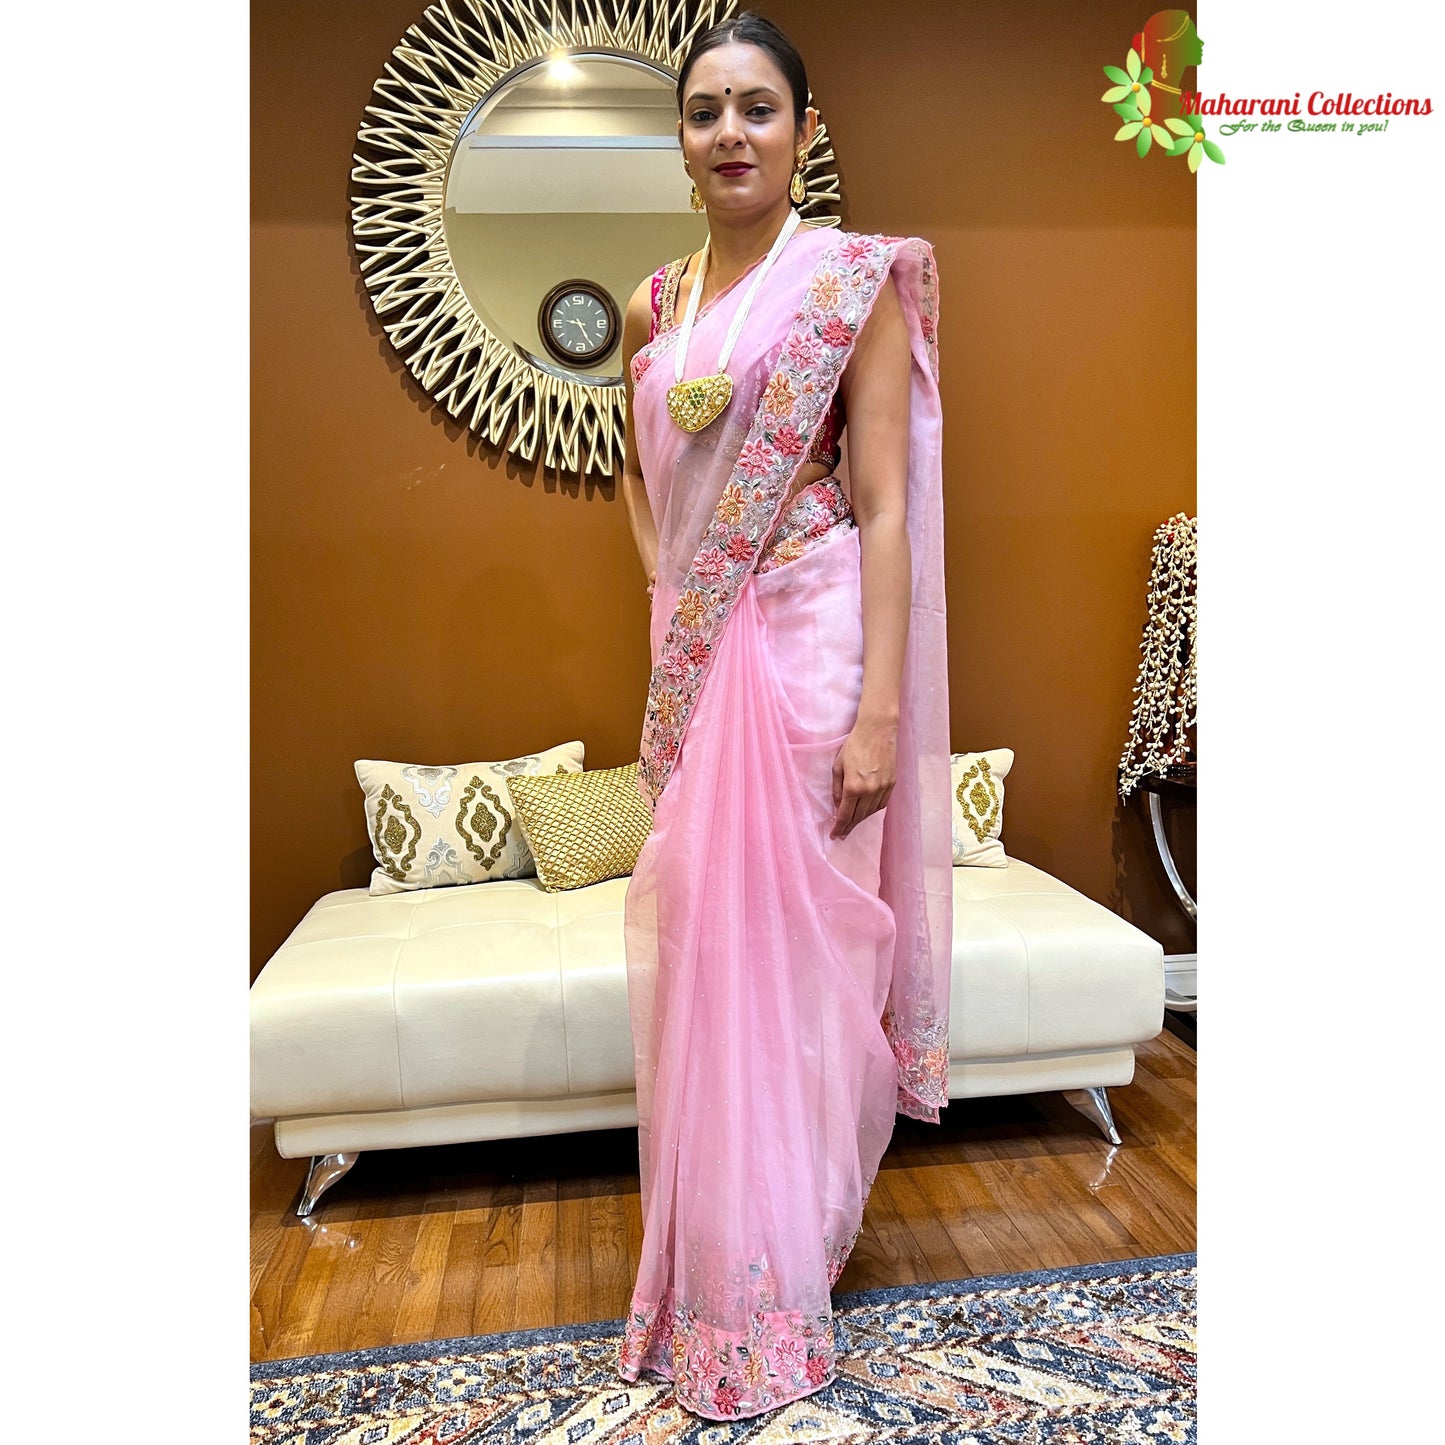 Maharani's Designer Party Wear Organza Saree - Pink (with Stitched Petticoat)